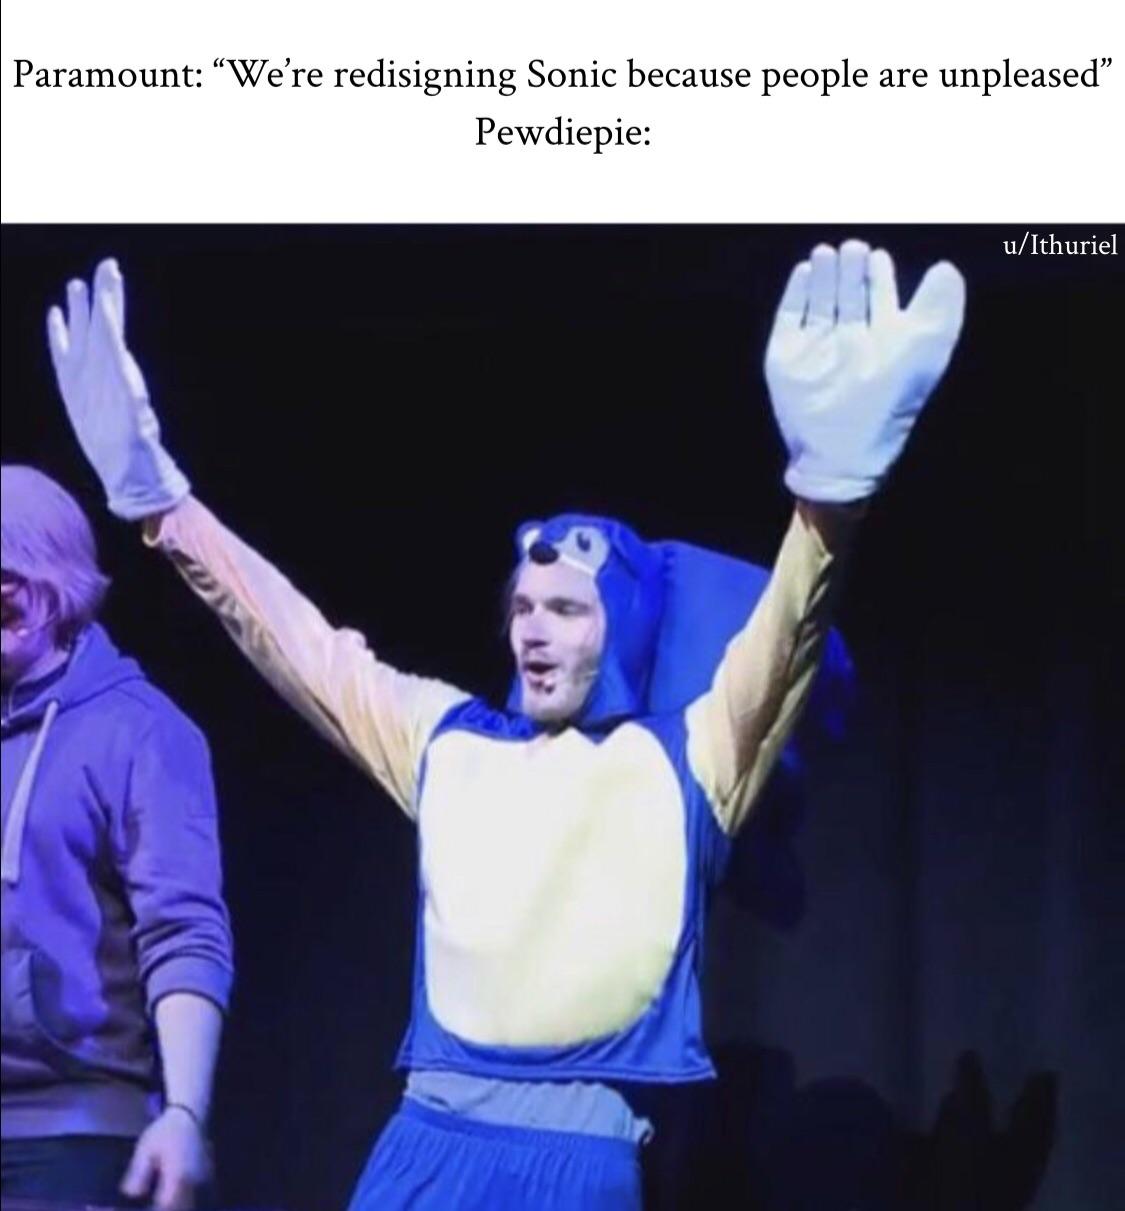 meme Sonic Movie Redesign memes - pewdiepie sonic costume - Paramount We're redisigning Sonic because people are unpleased Pewdiepie uIthuriel